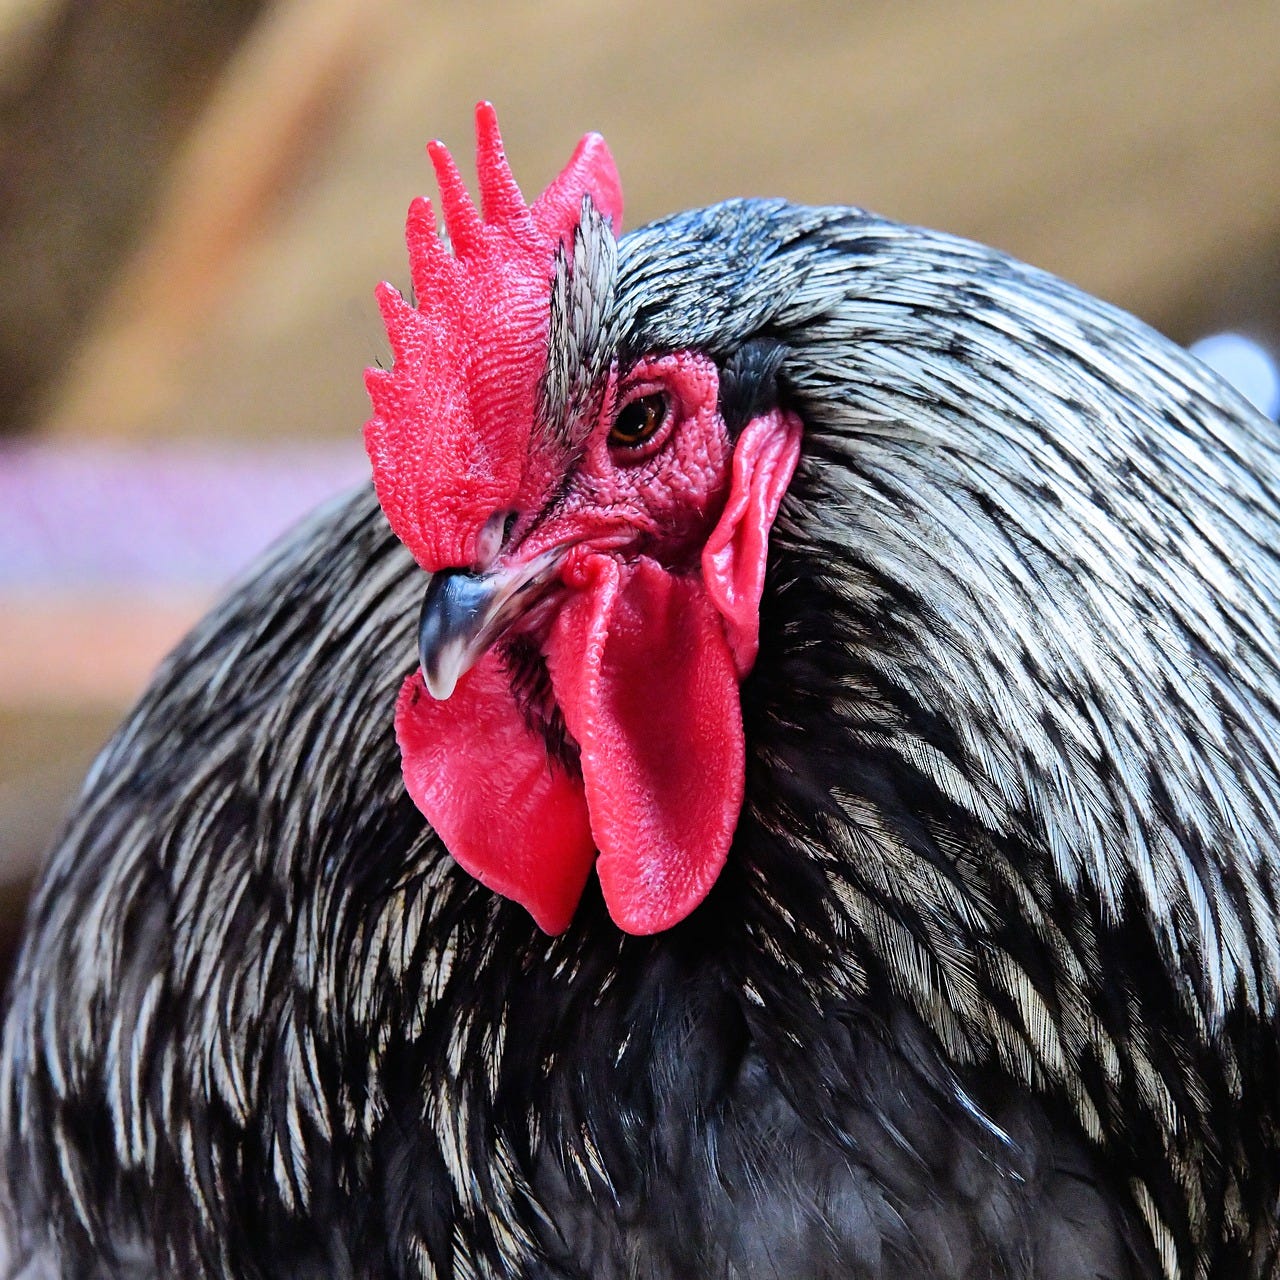 Close up photo of the head of fat rooster with shiny black feathers, bright red cock and comb and red eye against a tan background.